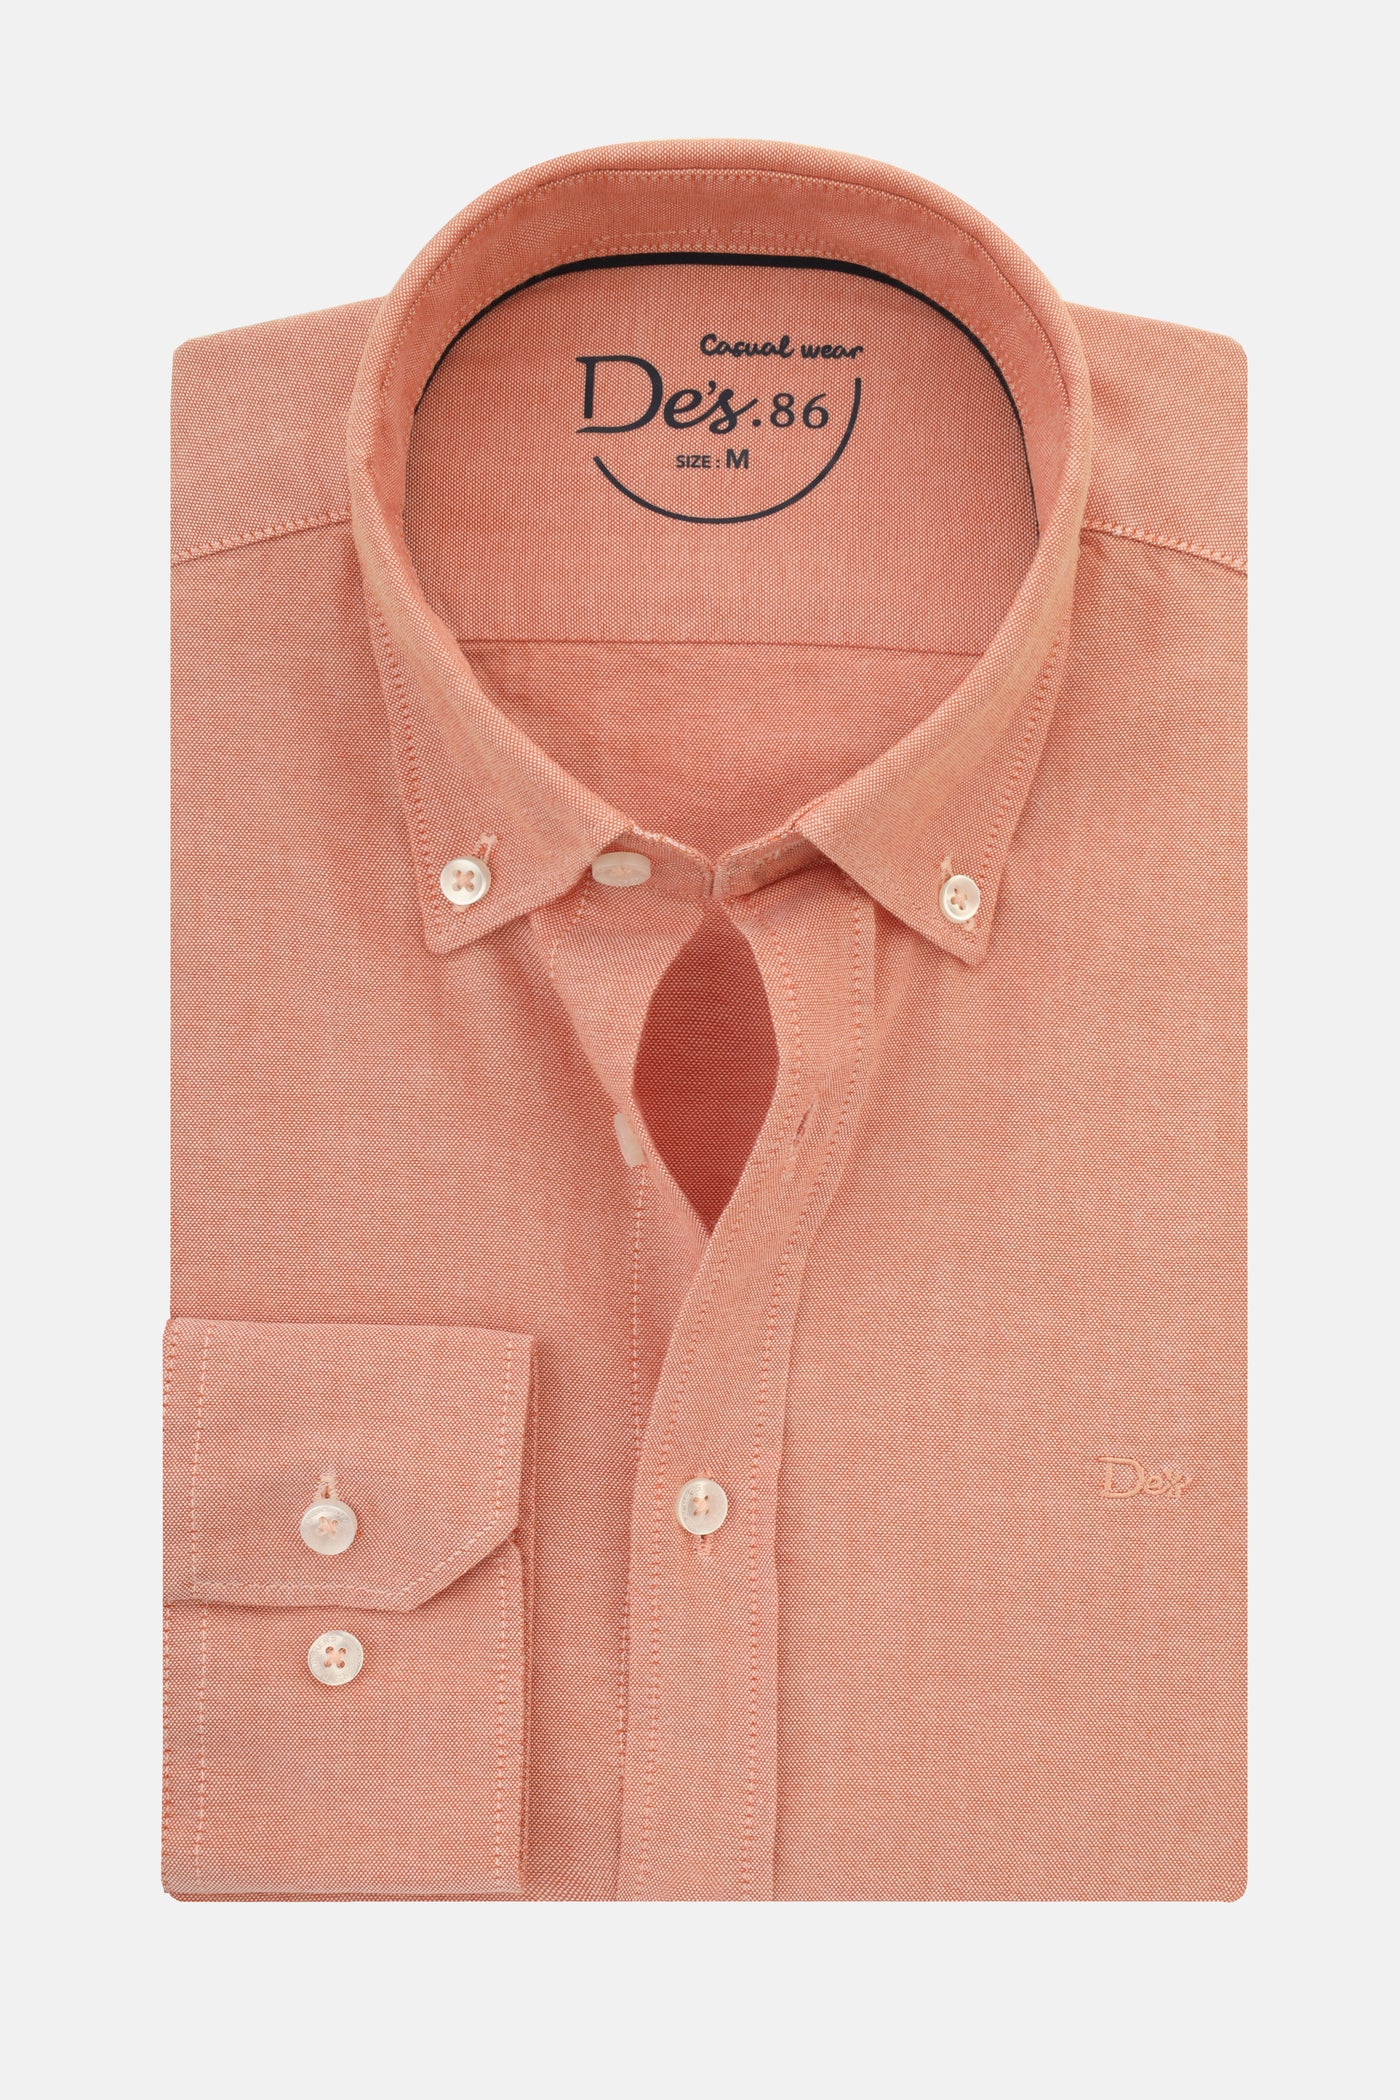 Solid Oxford Atomic Tangerine Cotton Casual Shirt